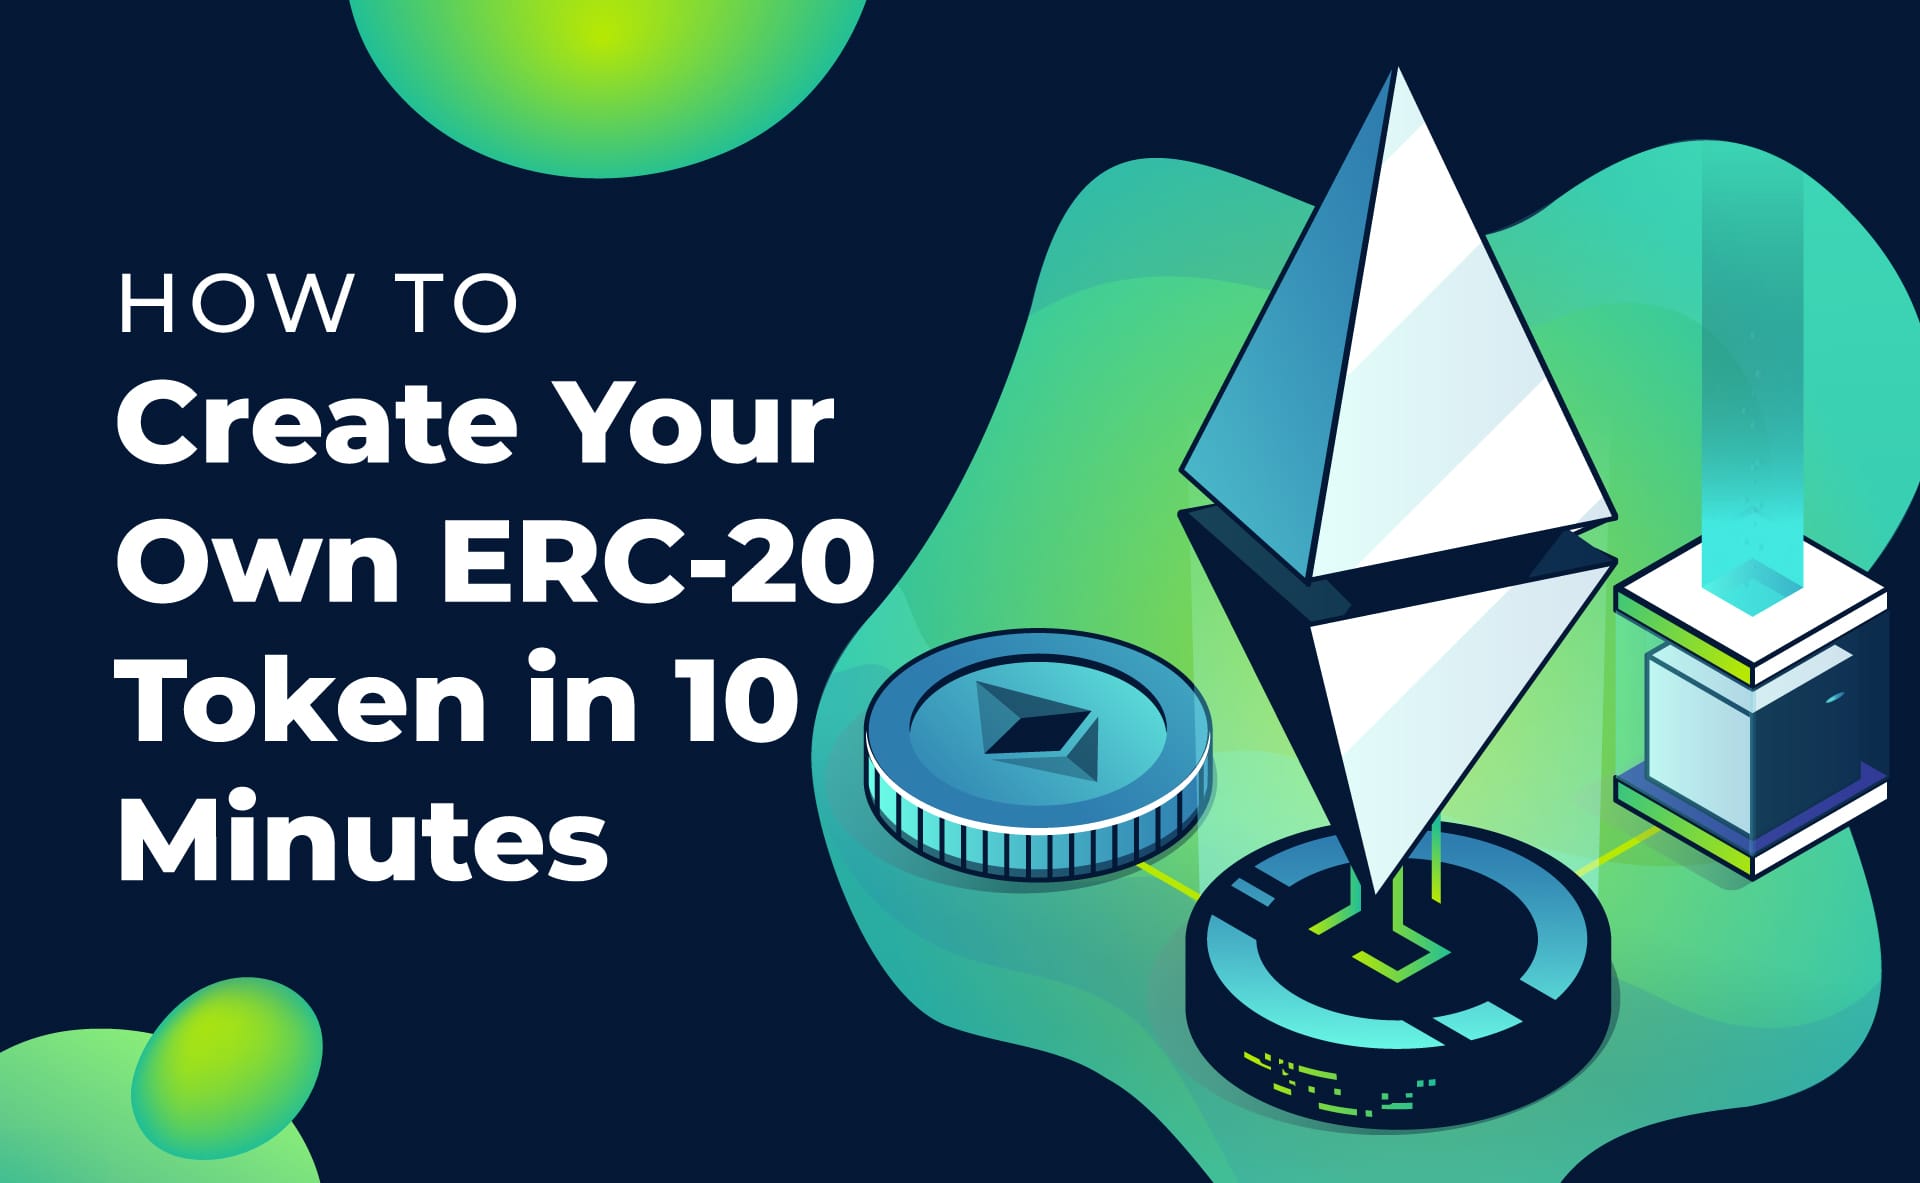 How to create and deploy an ERC token on the Ethereum blockchain - LogRocket Blog